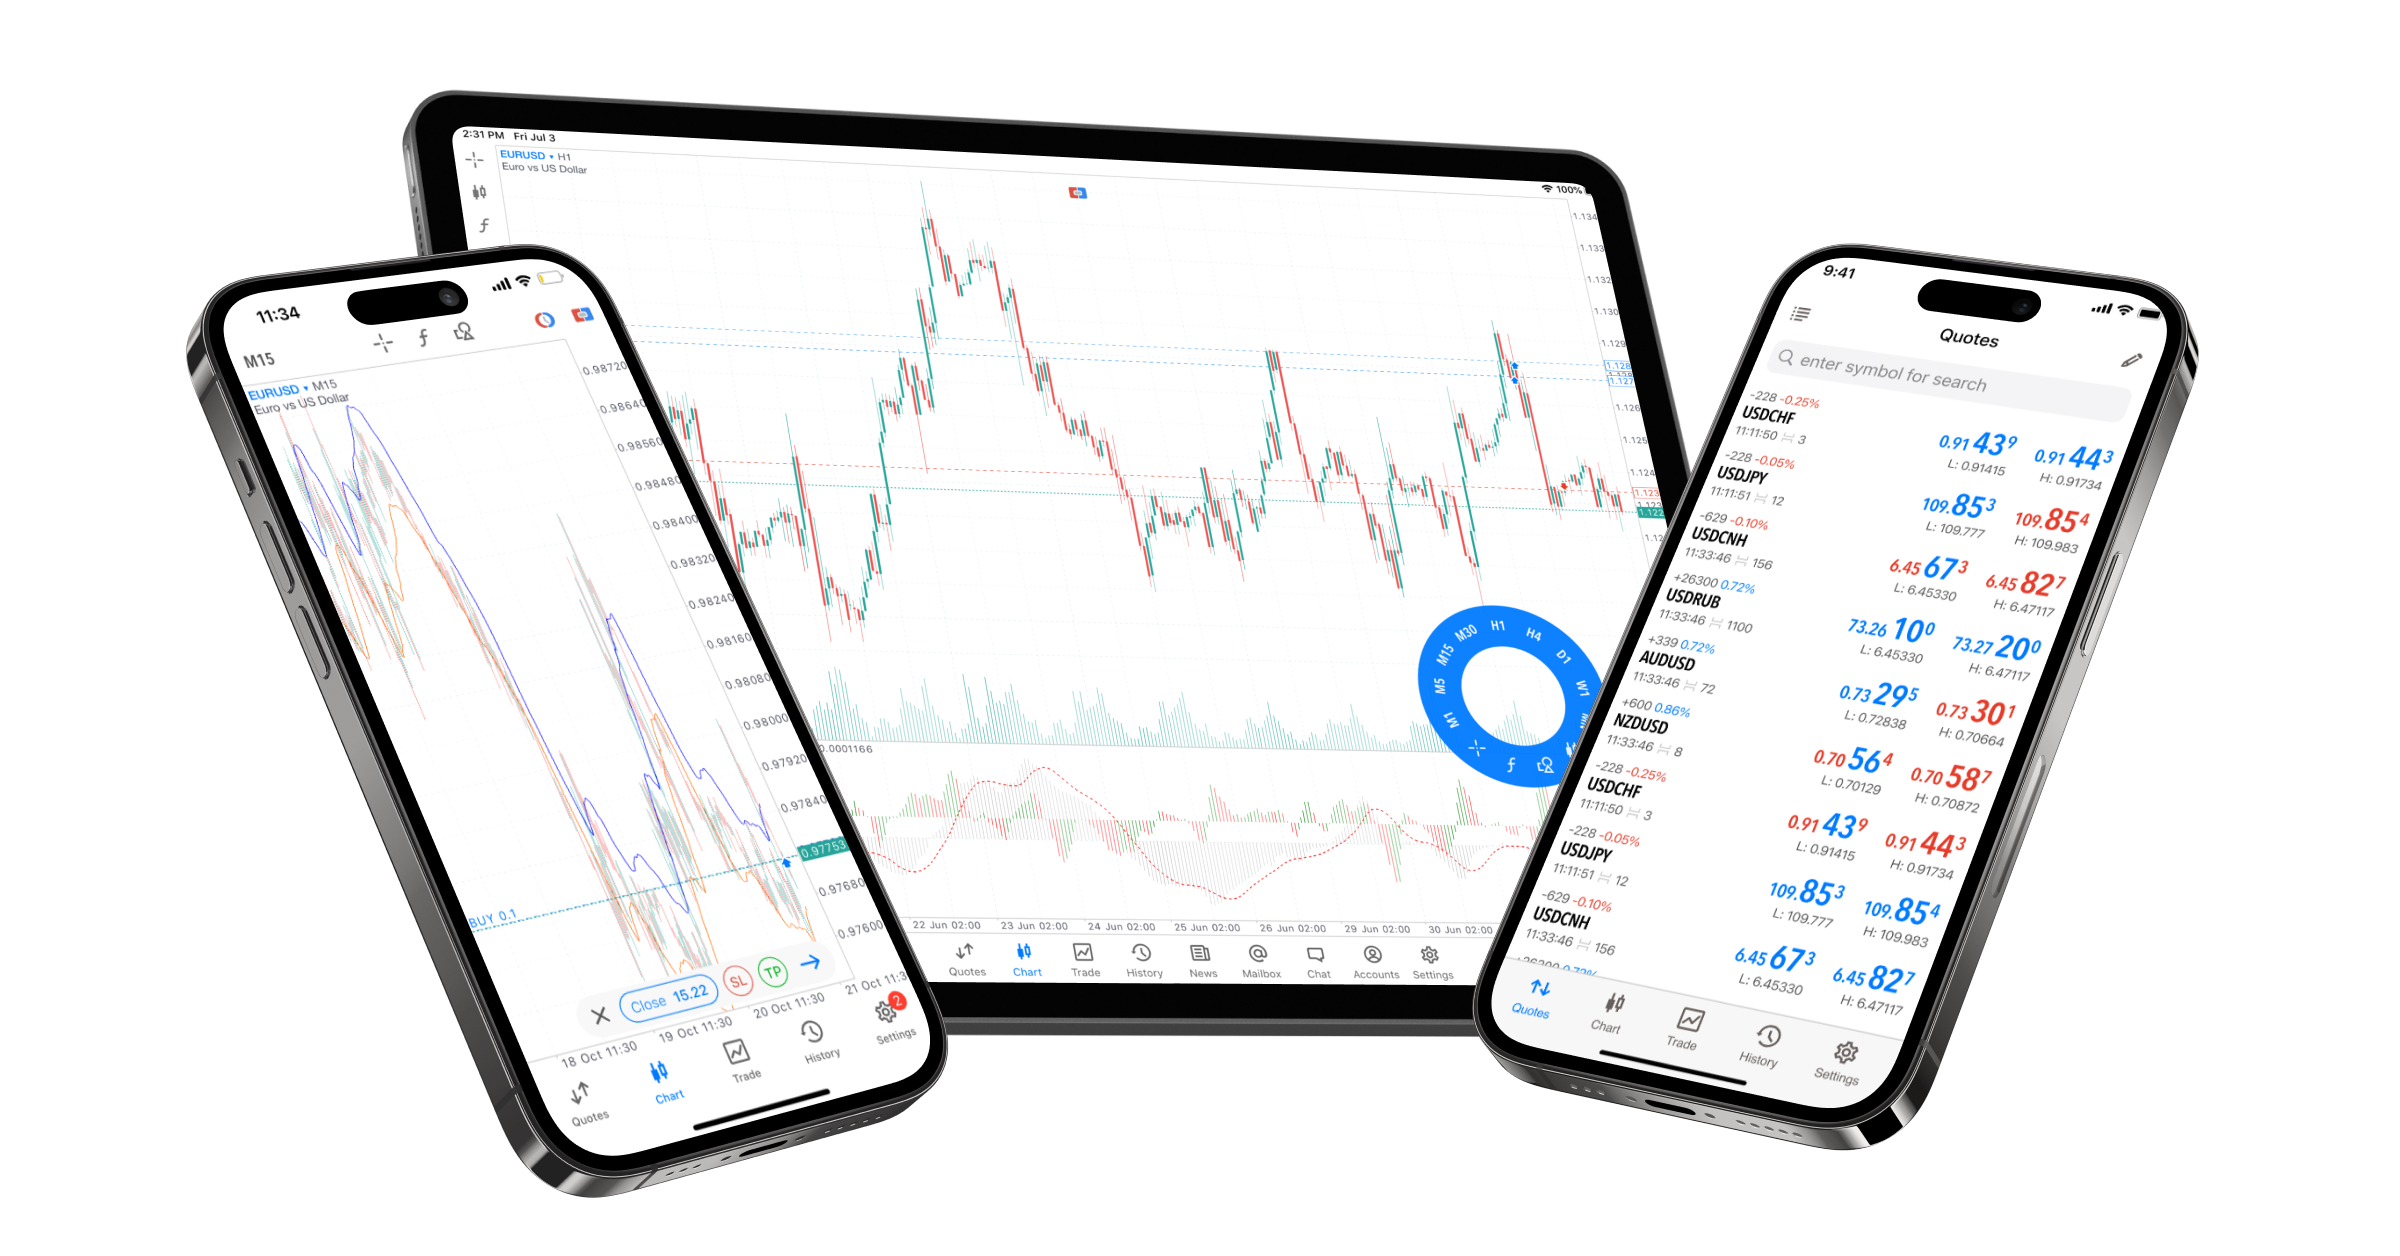 MetaTrader 4 & 5 Applications are back in the Apple App Store